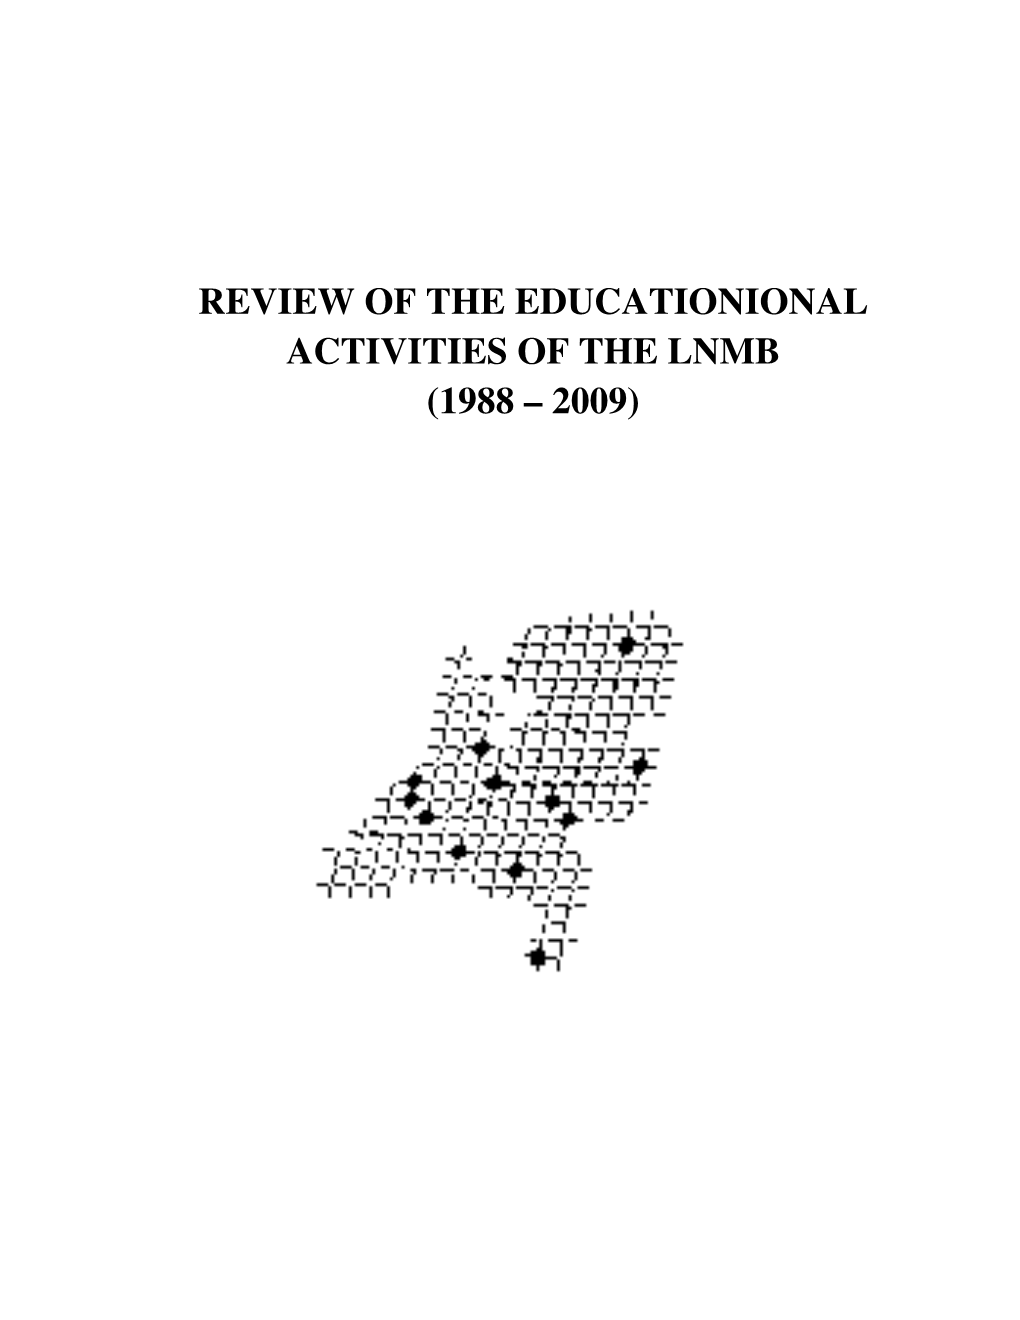 Review of the Educational Activities of the LNMB (1988